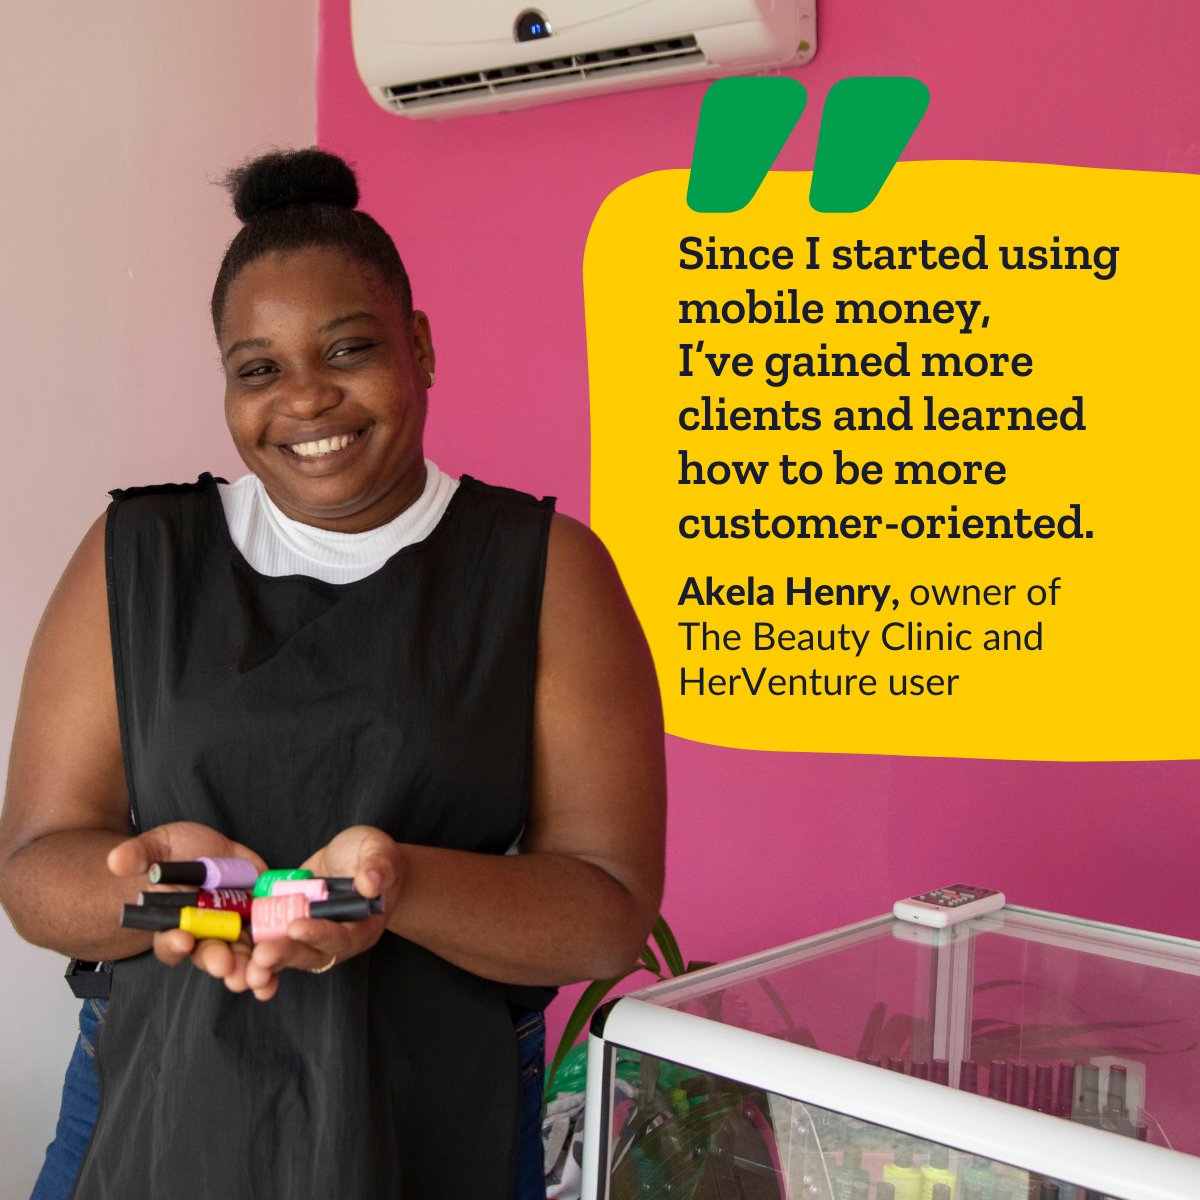 Akela Henry is a talented nail technician, who owns The Beauty Clinic in Georgetown, Guyana. Our #HerVenture app supported her to learn about mobile money & how to implement it in her business. Read her full story: cherieblairfoundation.org/impact/her-sto…